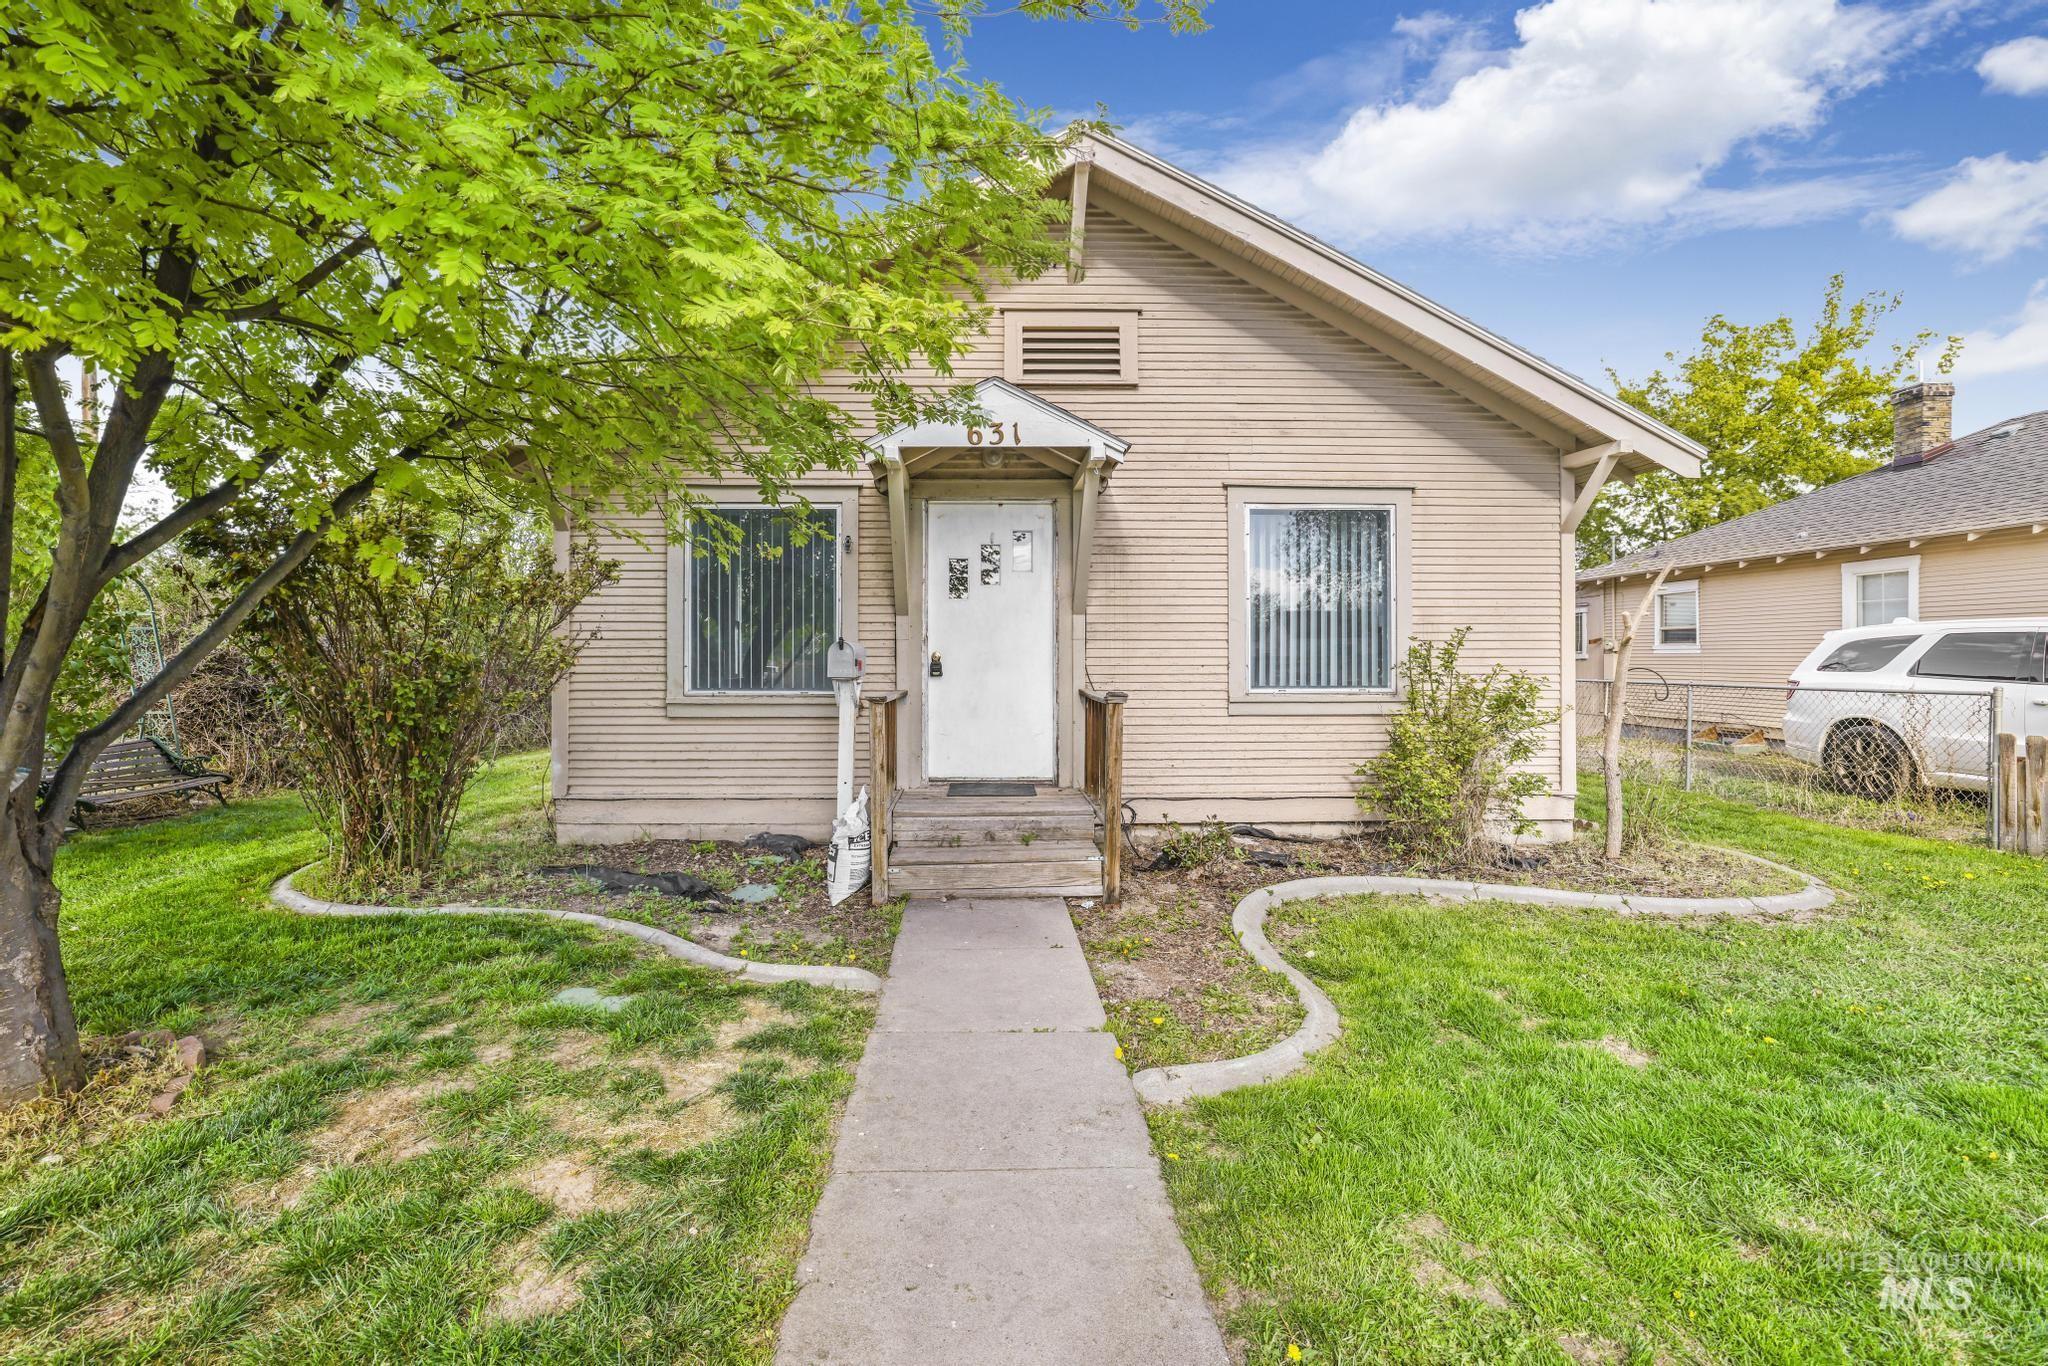 631 Ash St, Twin Falls, Idaho 83301, 3 Bedrooms, 1 Bathroom, Residential For Sale, Price $215,000,MLS 98908748